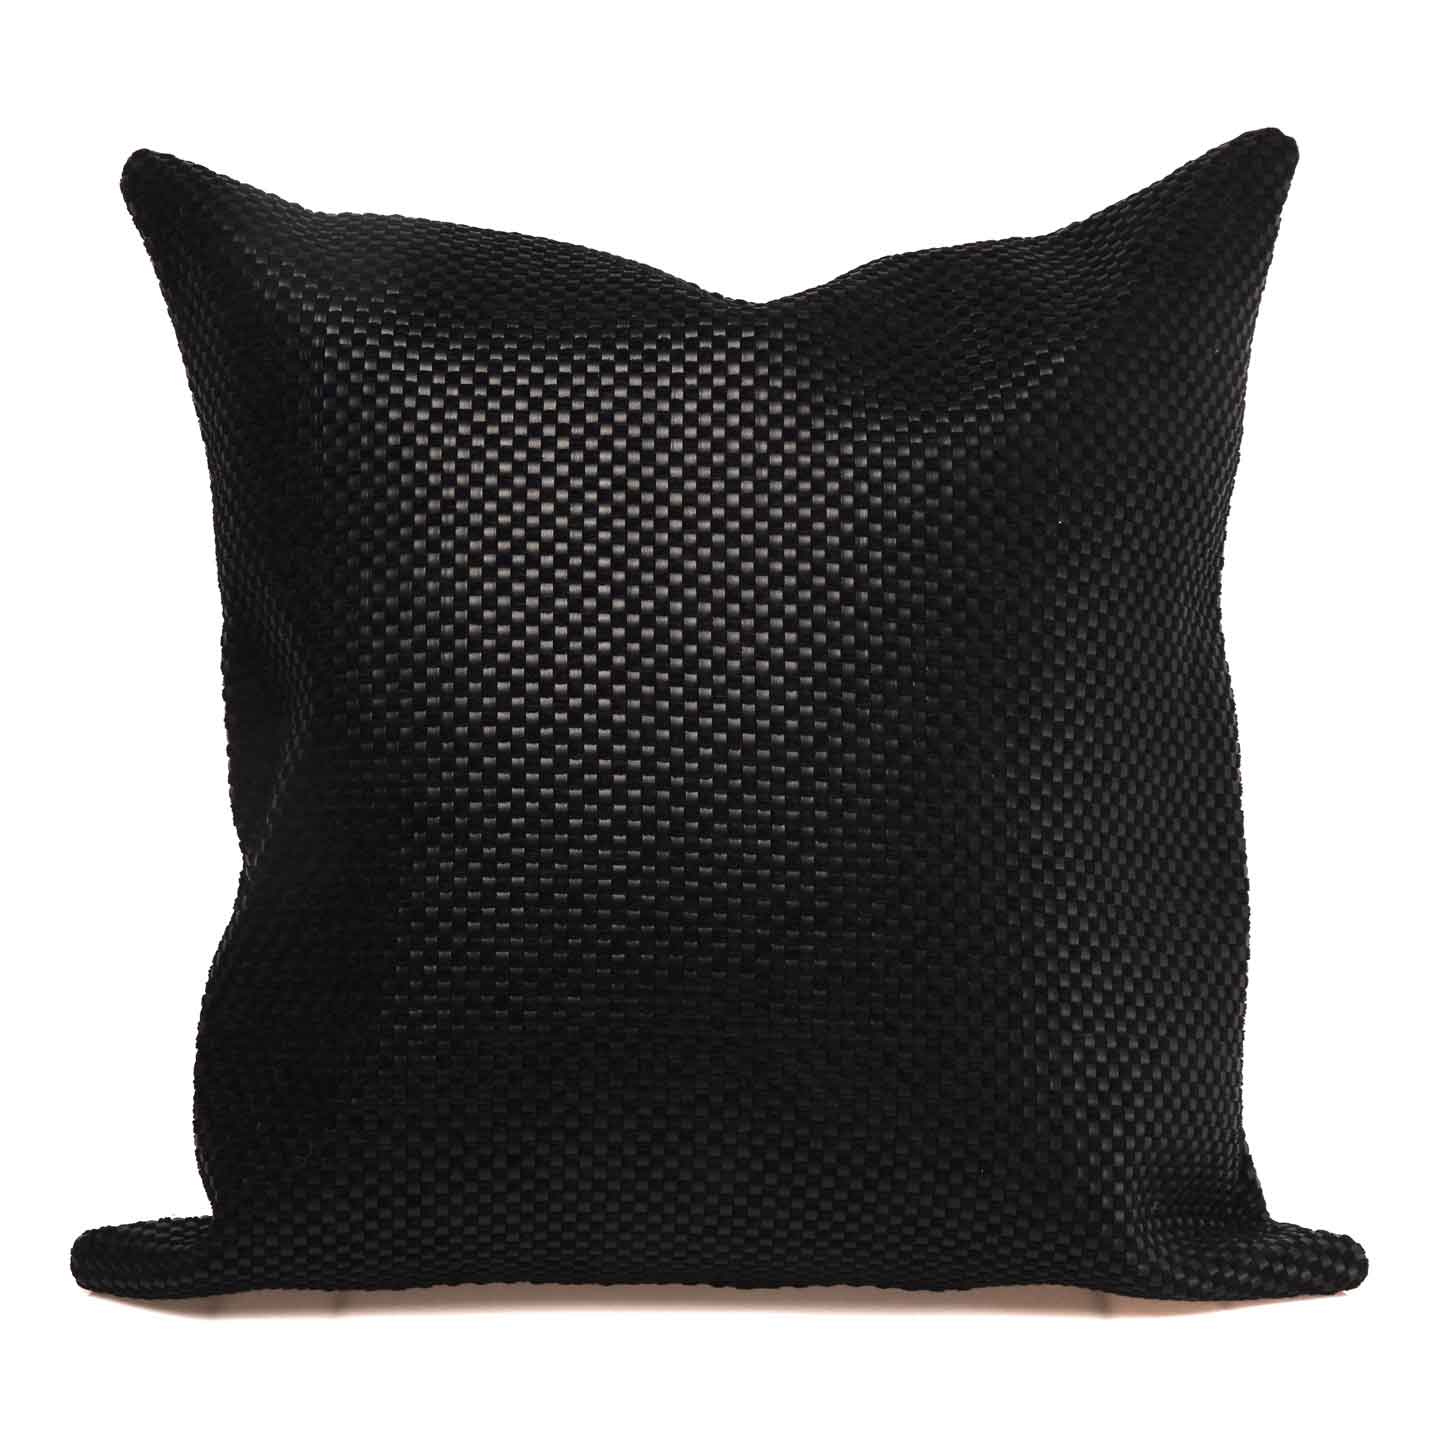 The Lorena pillow by Beau Home